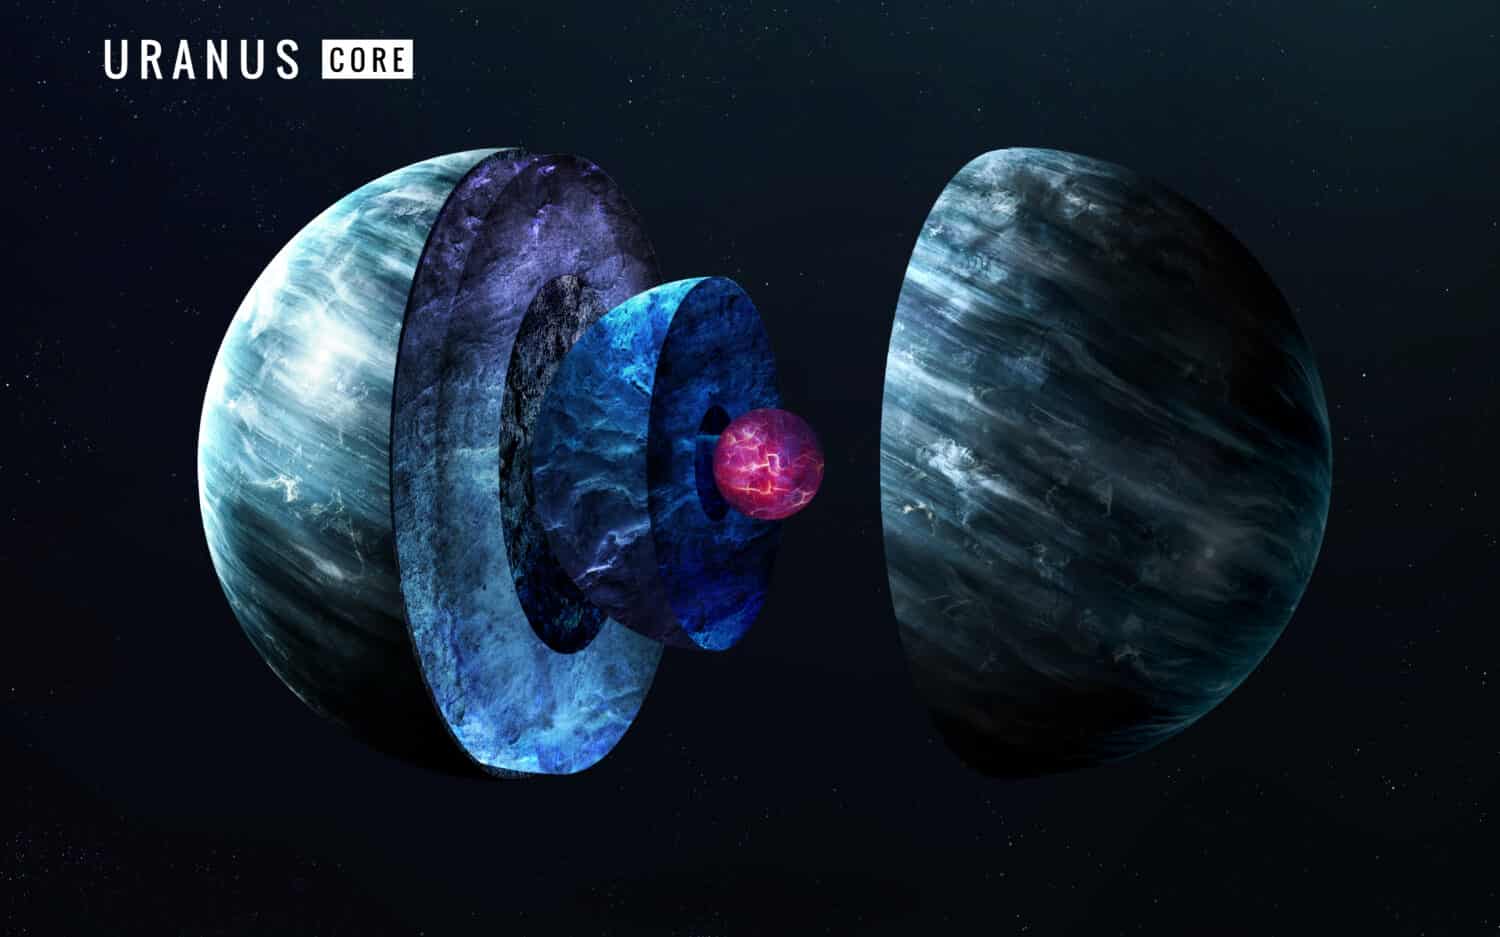 Uranus inner structure. Elements of this image furnished by NASA